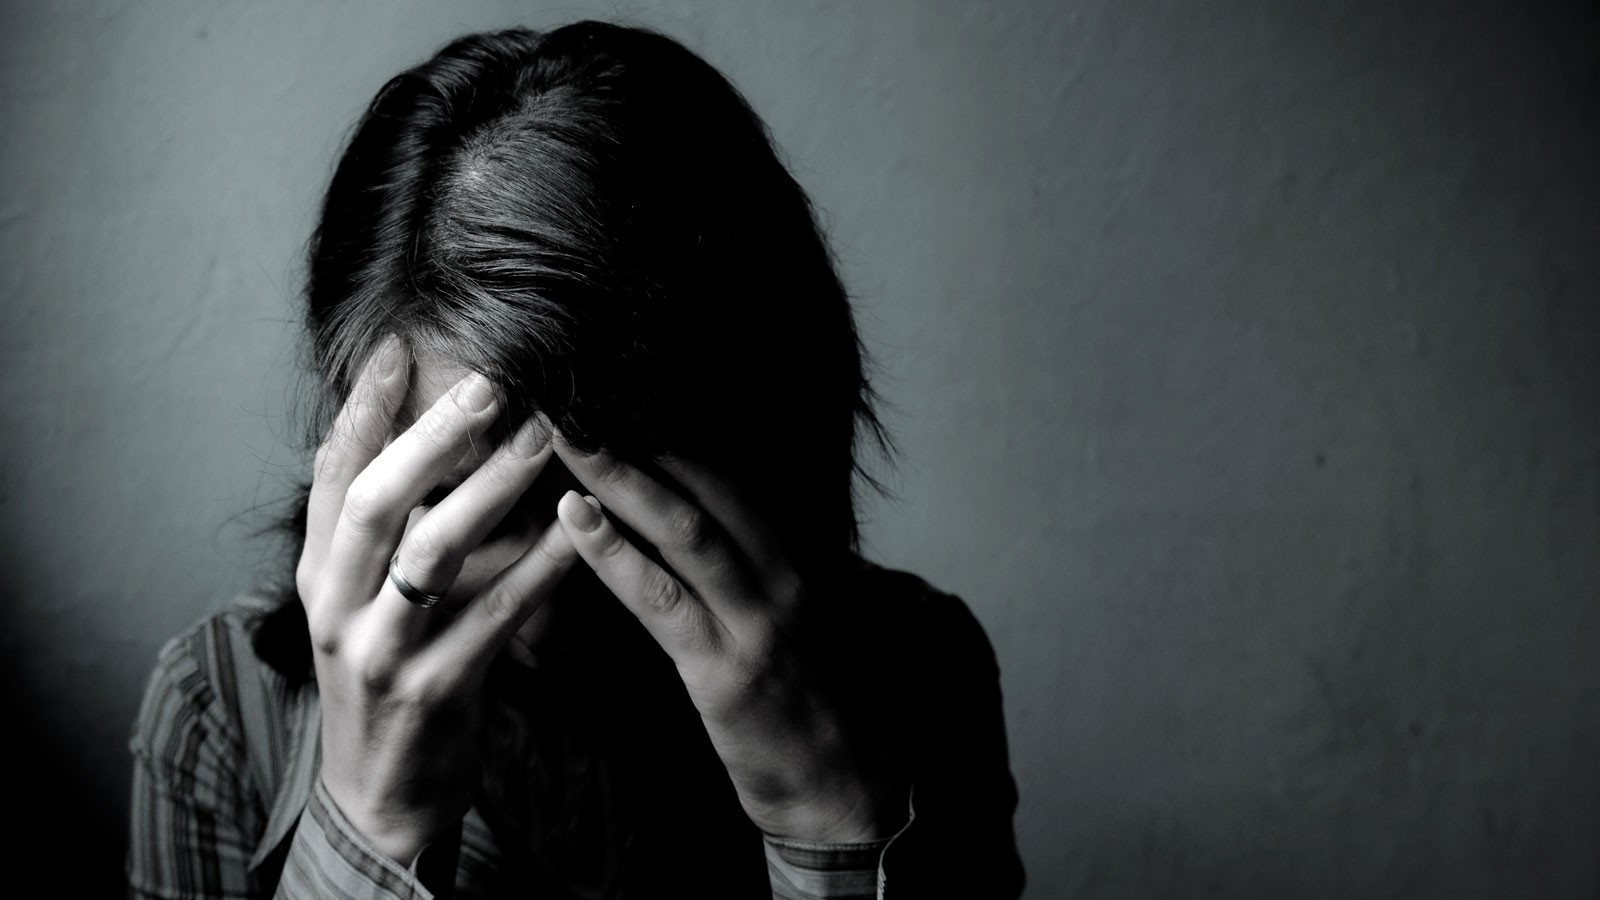 Report: Utah Suicide High, Including for Girls and Women